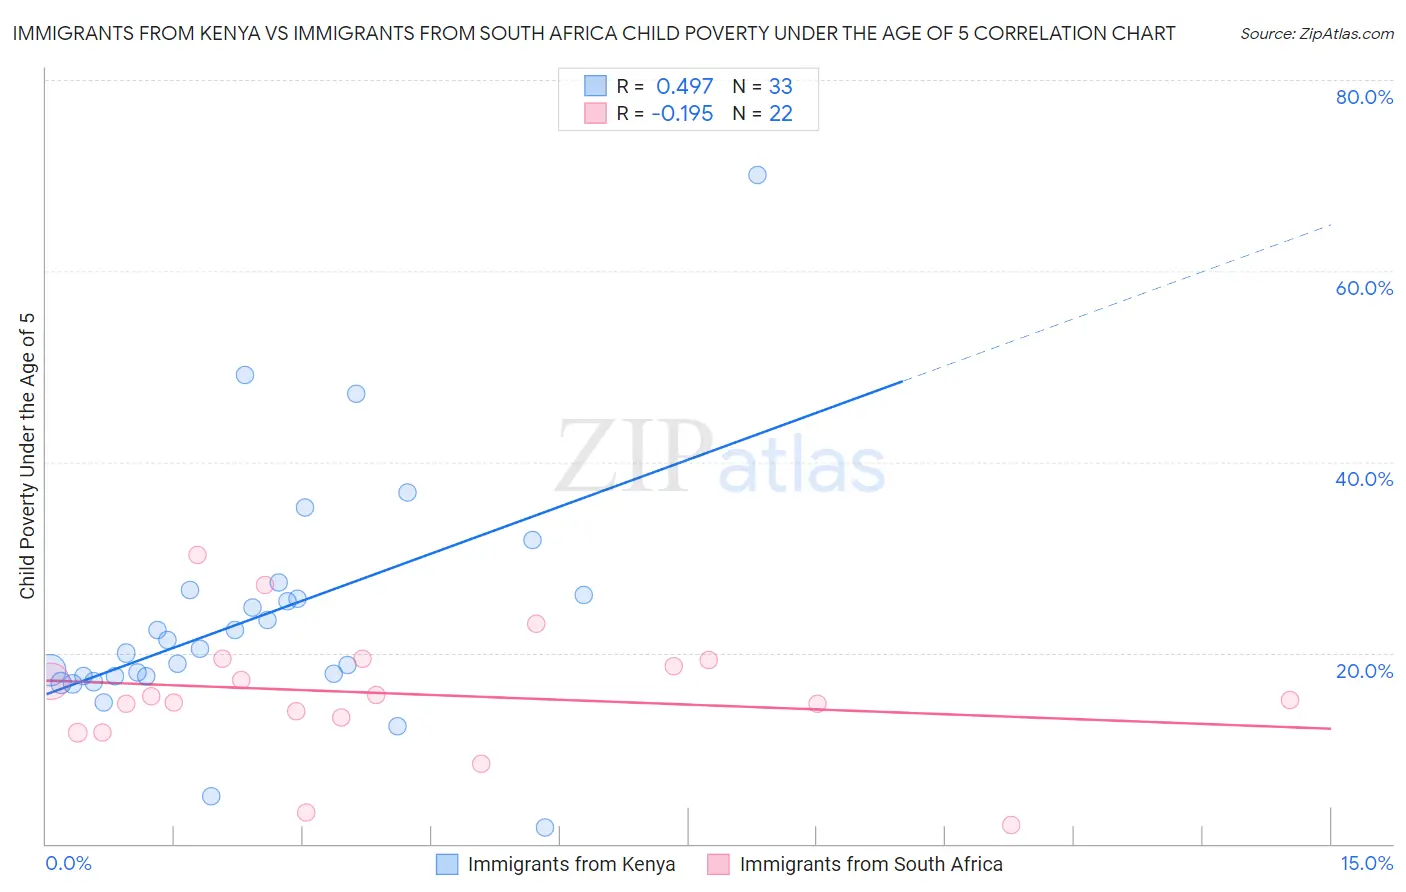 Immigrants from Kenya vs Immigrants from South Africa Child Poverty Under the Age of 5